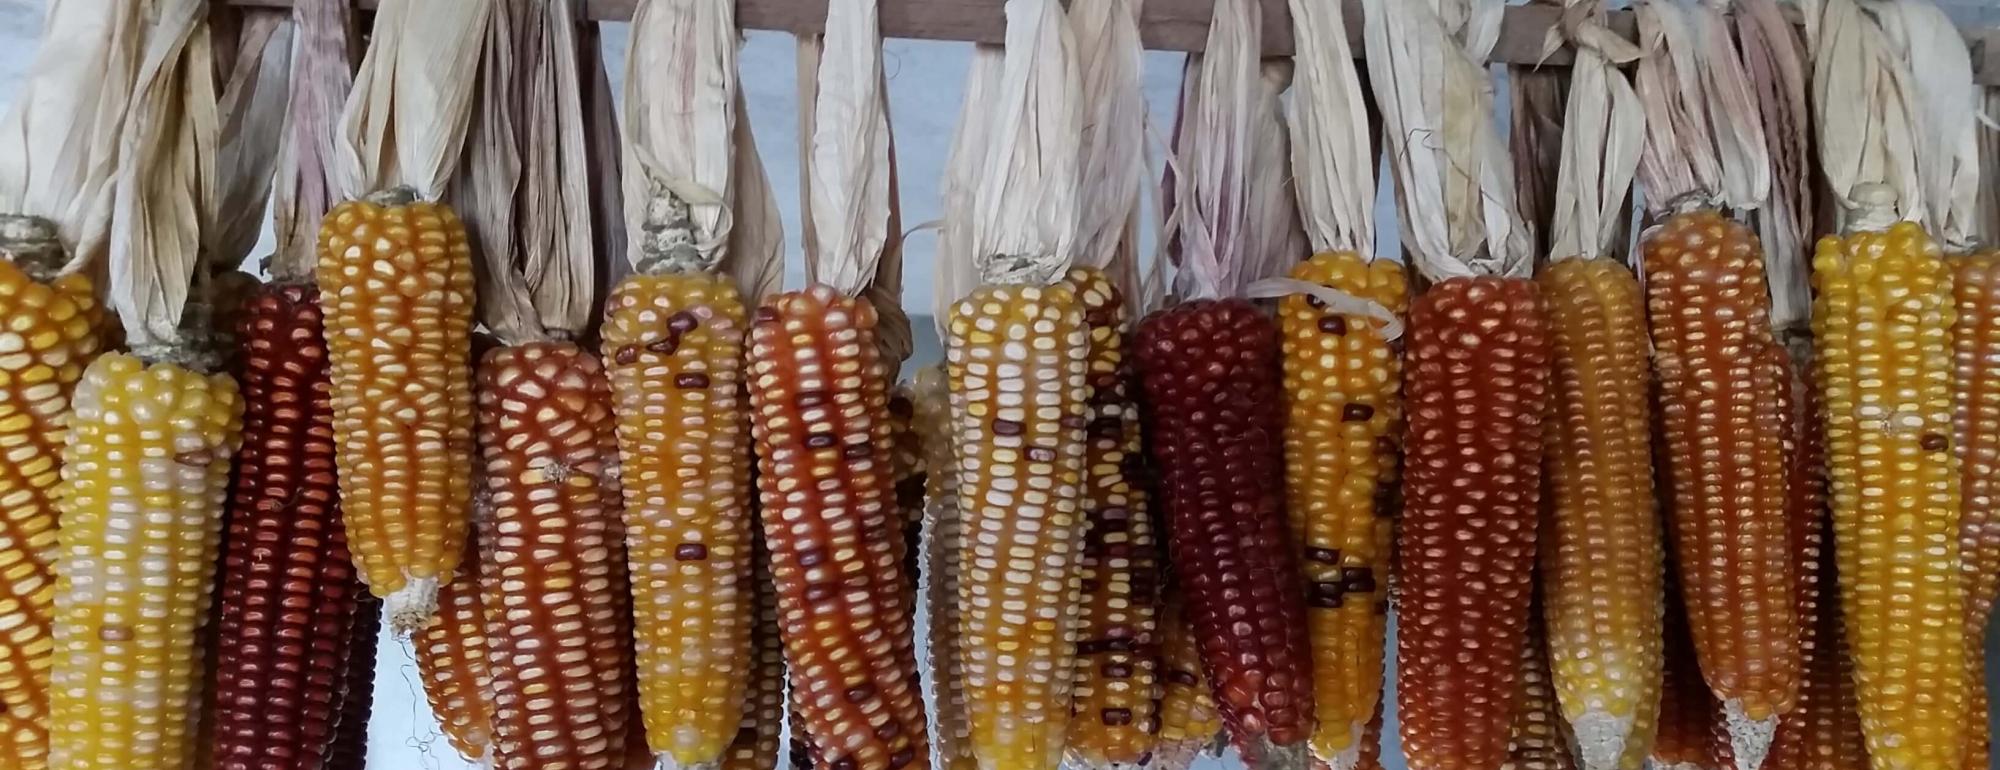 Corns lined up in a row, colors ranging from yellow to brown